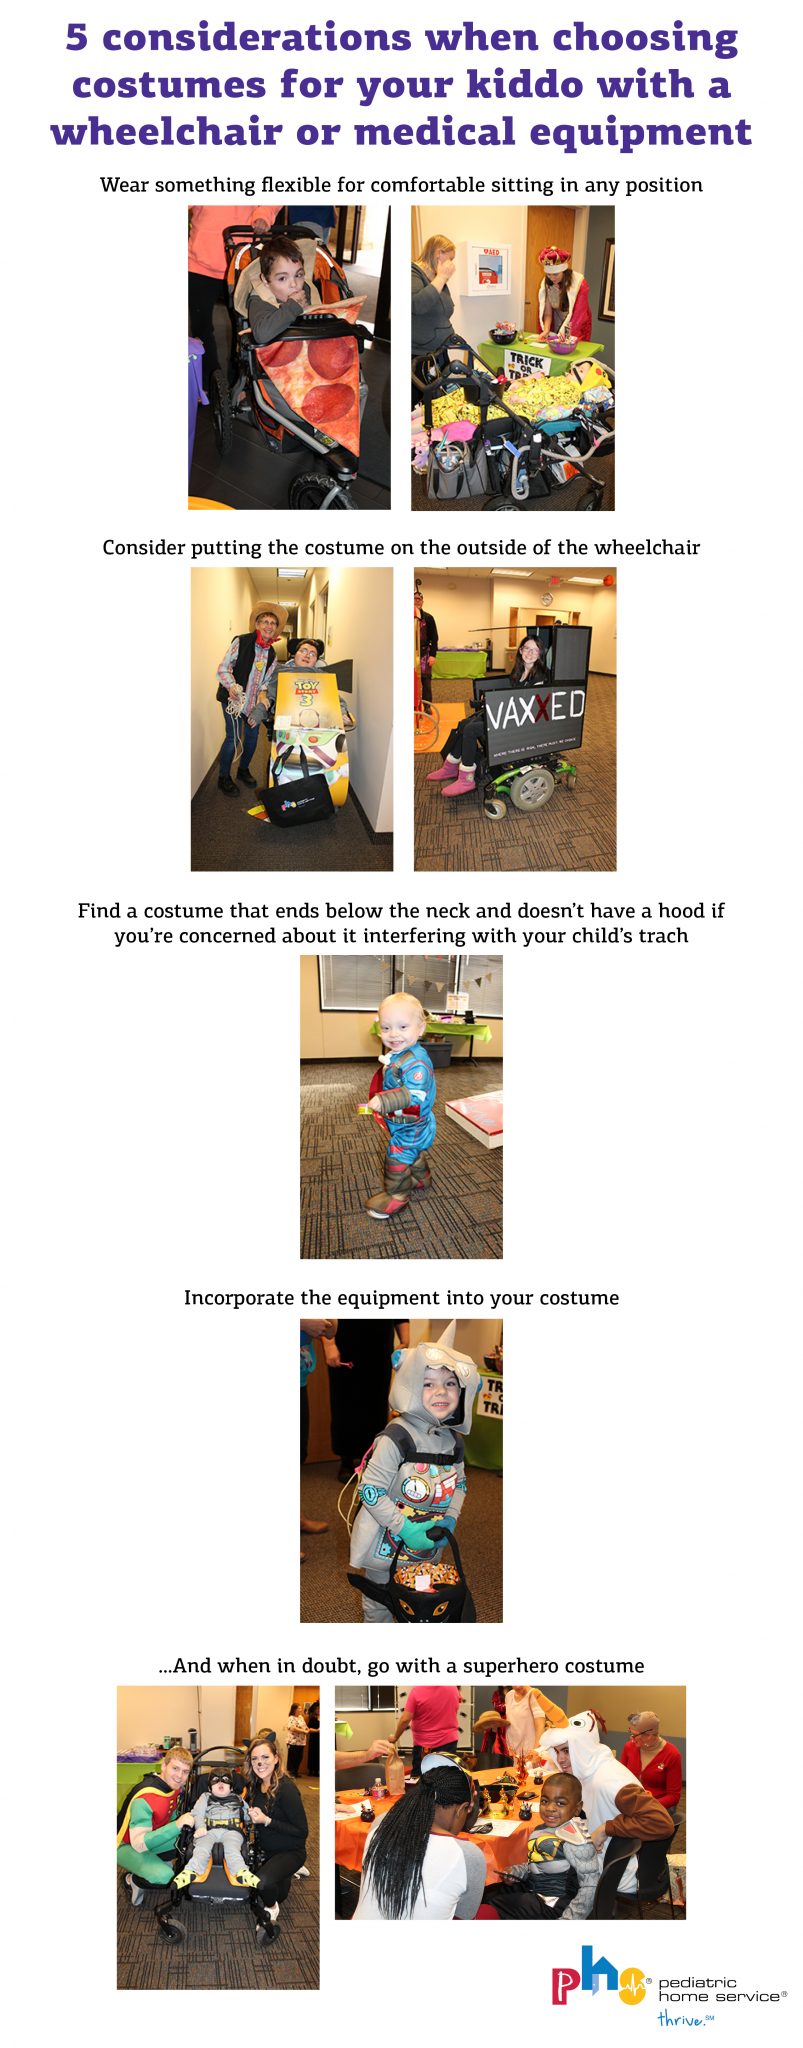 Wheelchair and medical equipment friendly costumes for kids